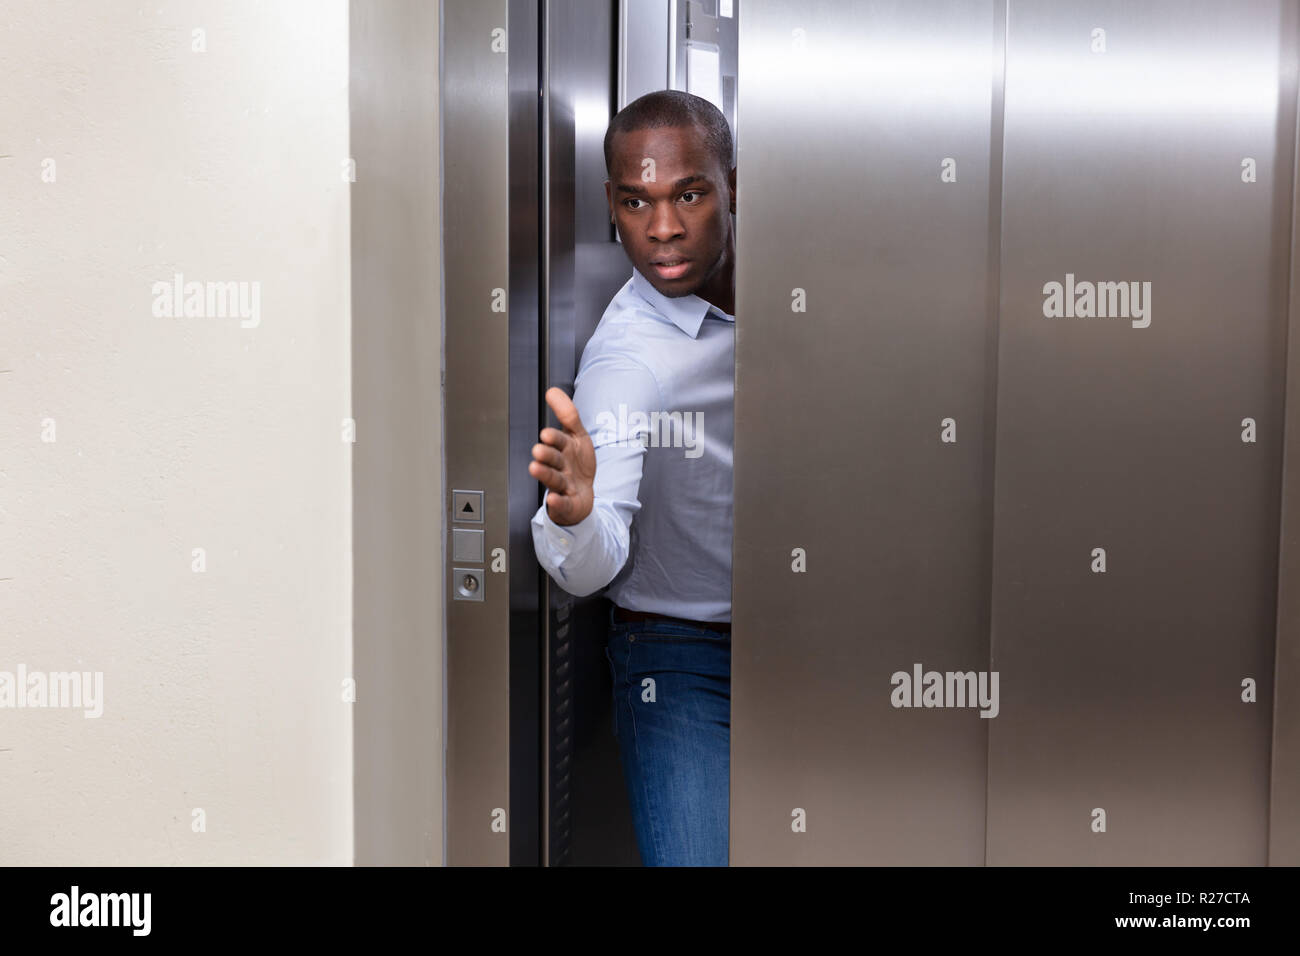 Young African Man Trying To Stop Elevator Door With His Hand Stock Photo